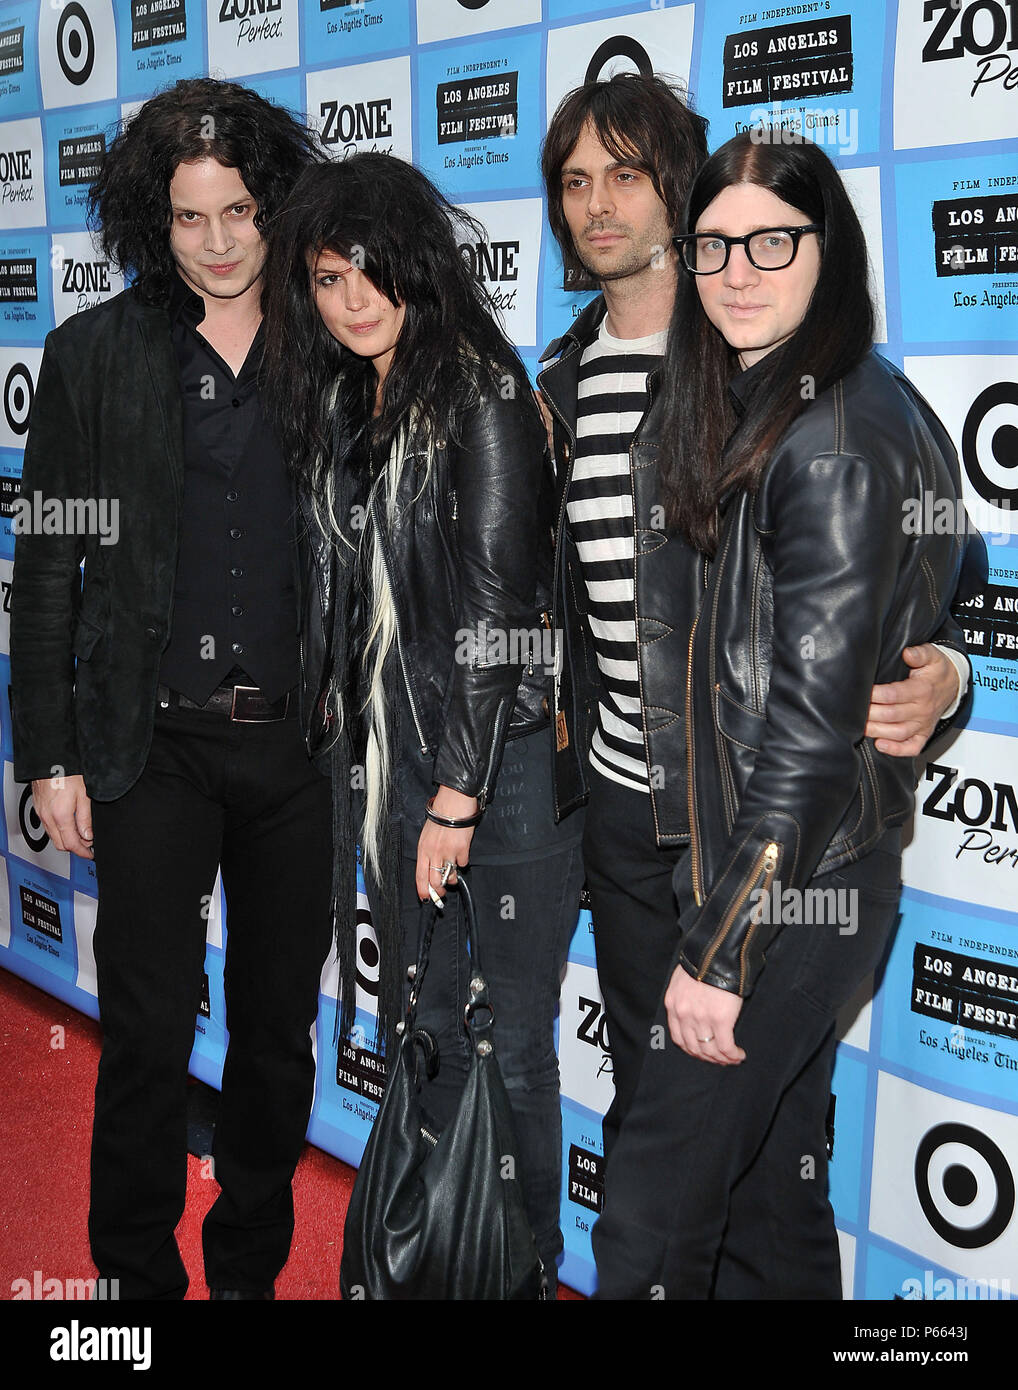 Jack White, Alison Mosshart ( of The Kills ), Dean Fertita ( of the Queens of Stone Age ), Jack lawrence ( of the Raconteurs )- It May Get loud Premiere at the LA Film Festival at the Man Festival Theatre In Los Angeles.          -            TheDeadWeather 15.jpgTheDeadWeather 15  Event in Hollywood Life - California, Red Carpet Event, USA, Film Industry, Celebrities, Photography, Bestof, Arts Culture and Entertainment, Topix Celebrities fashion, Best of, Hollywood Life, Event in Hollywood Life - California, Red Carpet and backstage, ,Arts Culture and Entertainment, Photography,    inquiry ts Stock Photo